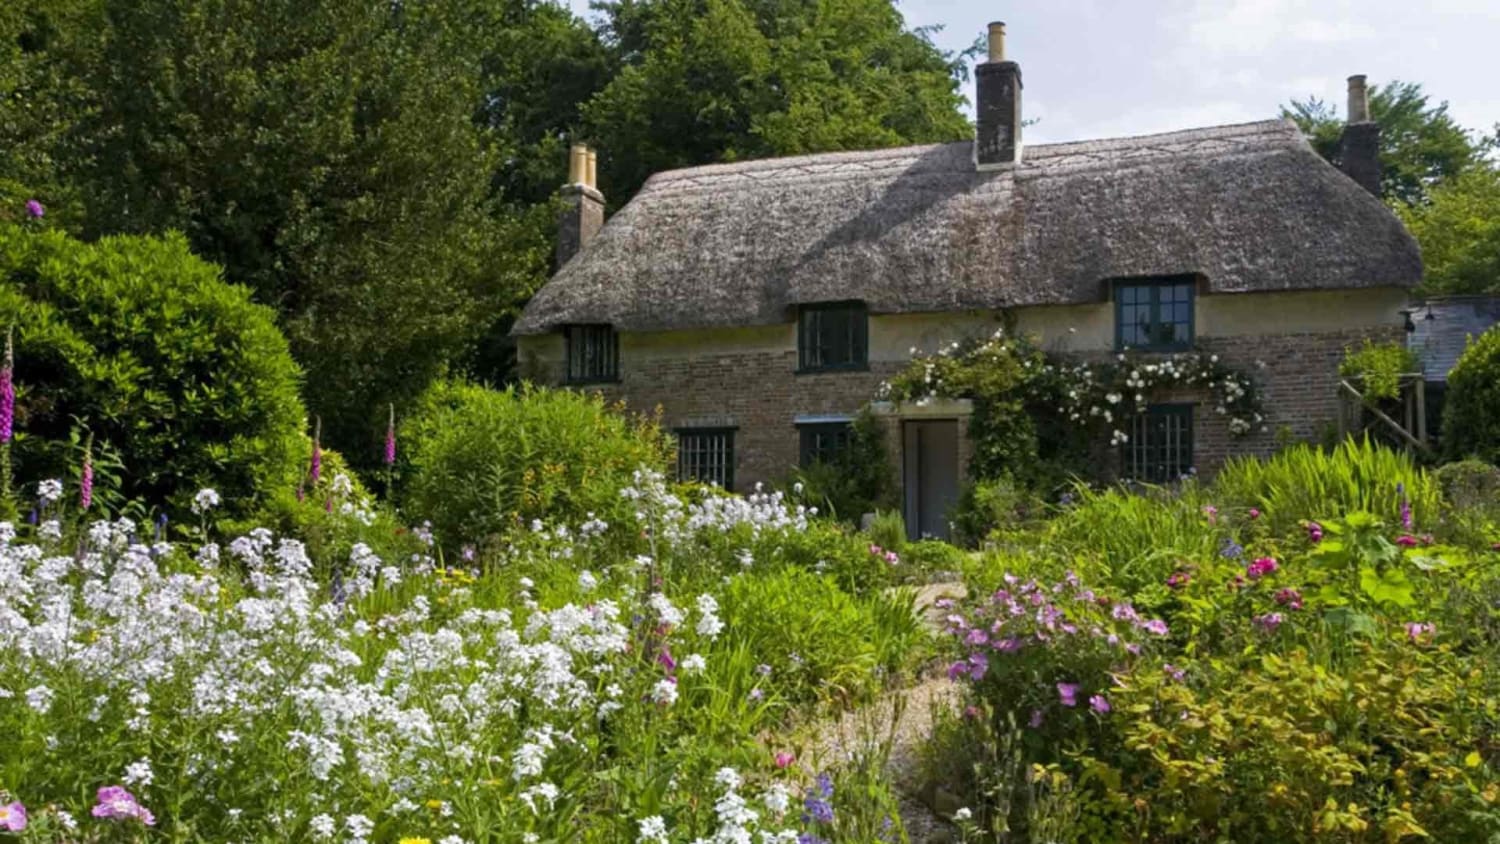 At home with Jane Austen and Lord Byron: famous writers’ houses you can visit in the UK and beyond